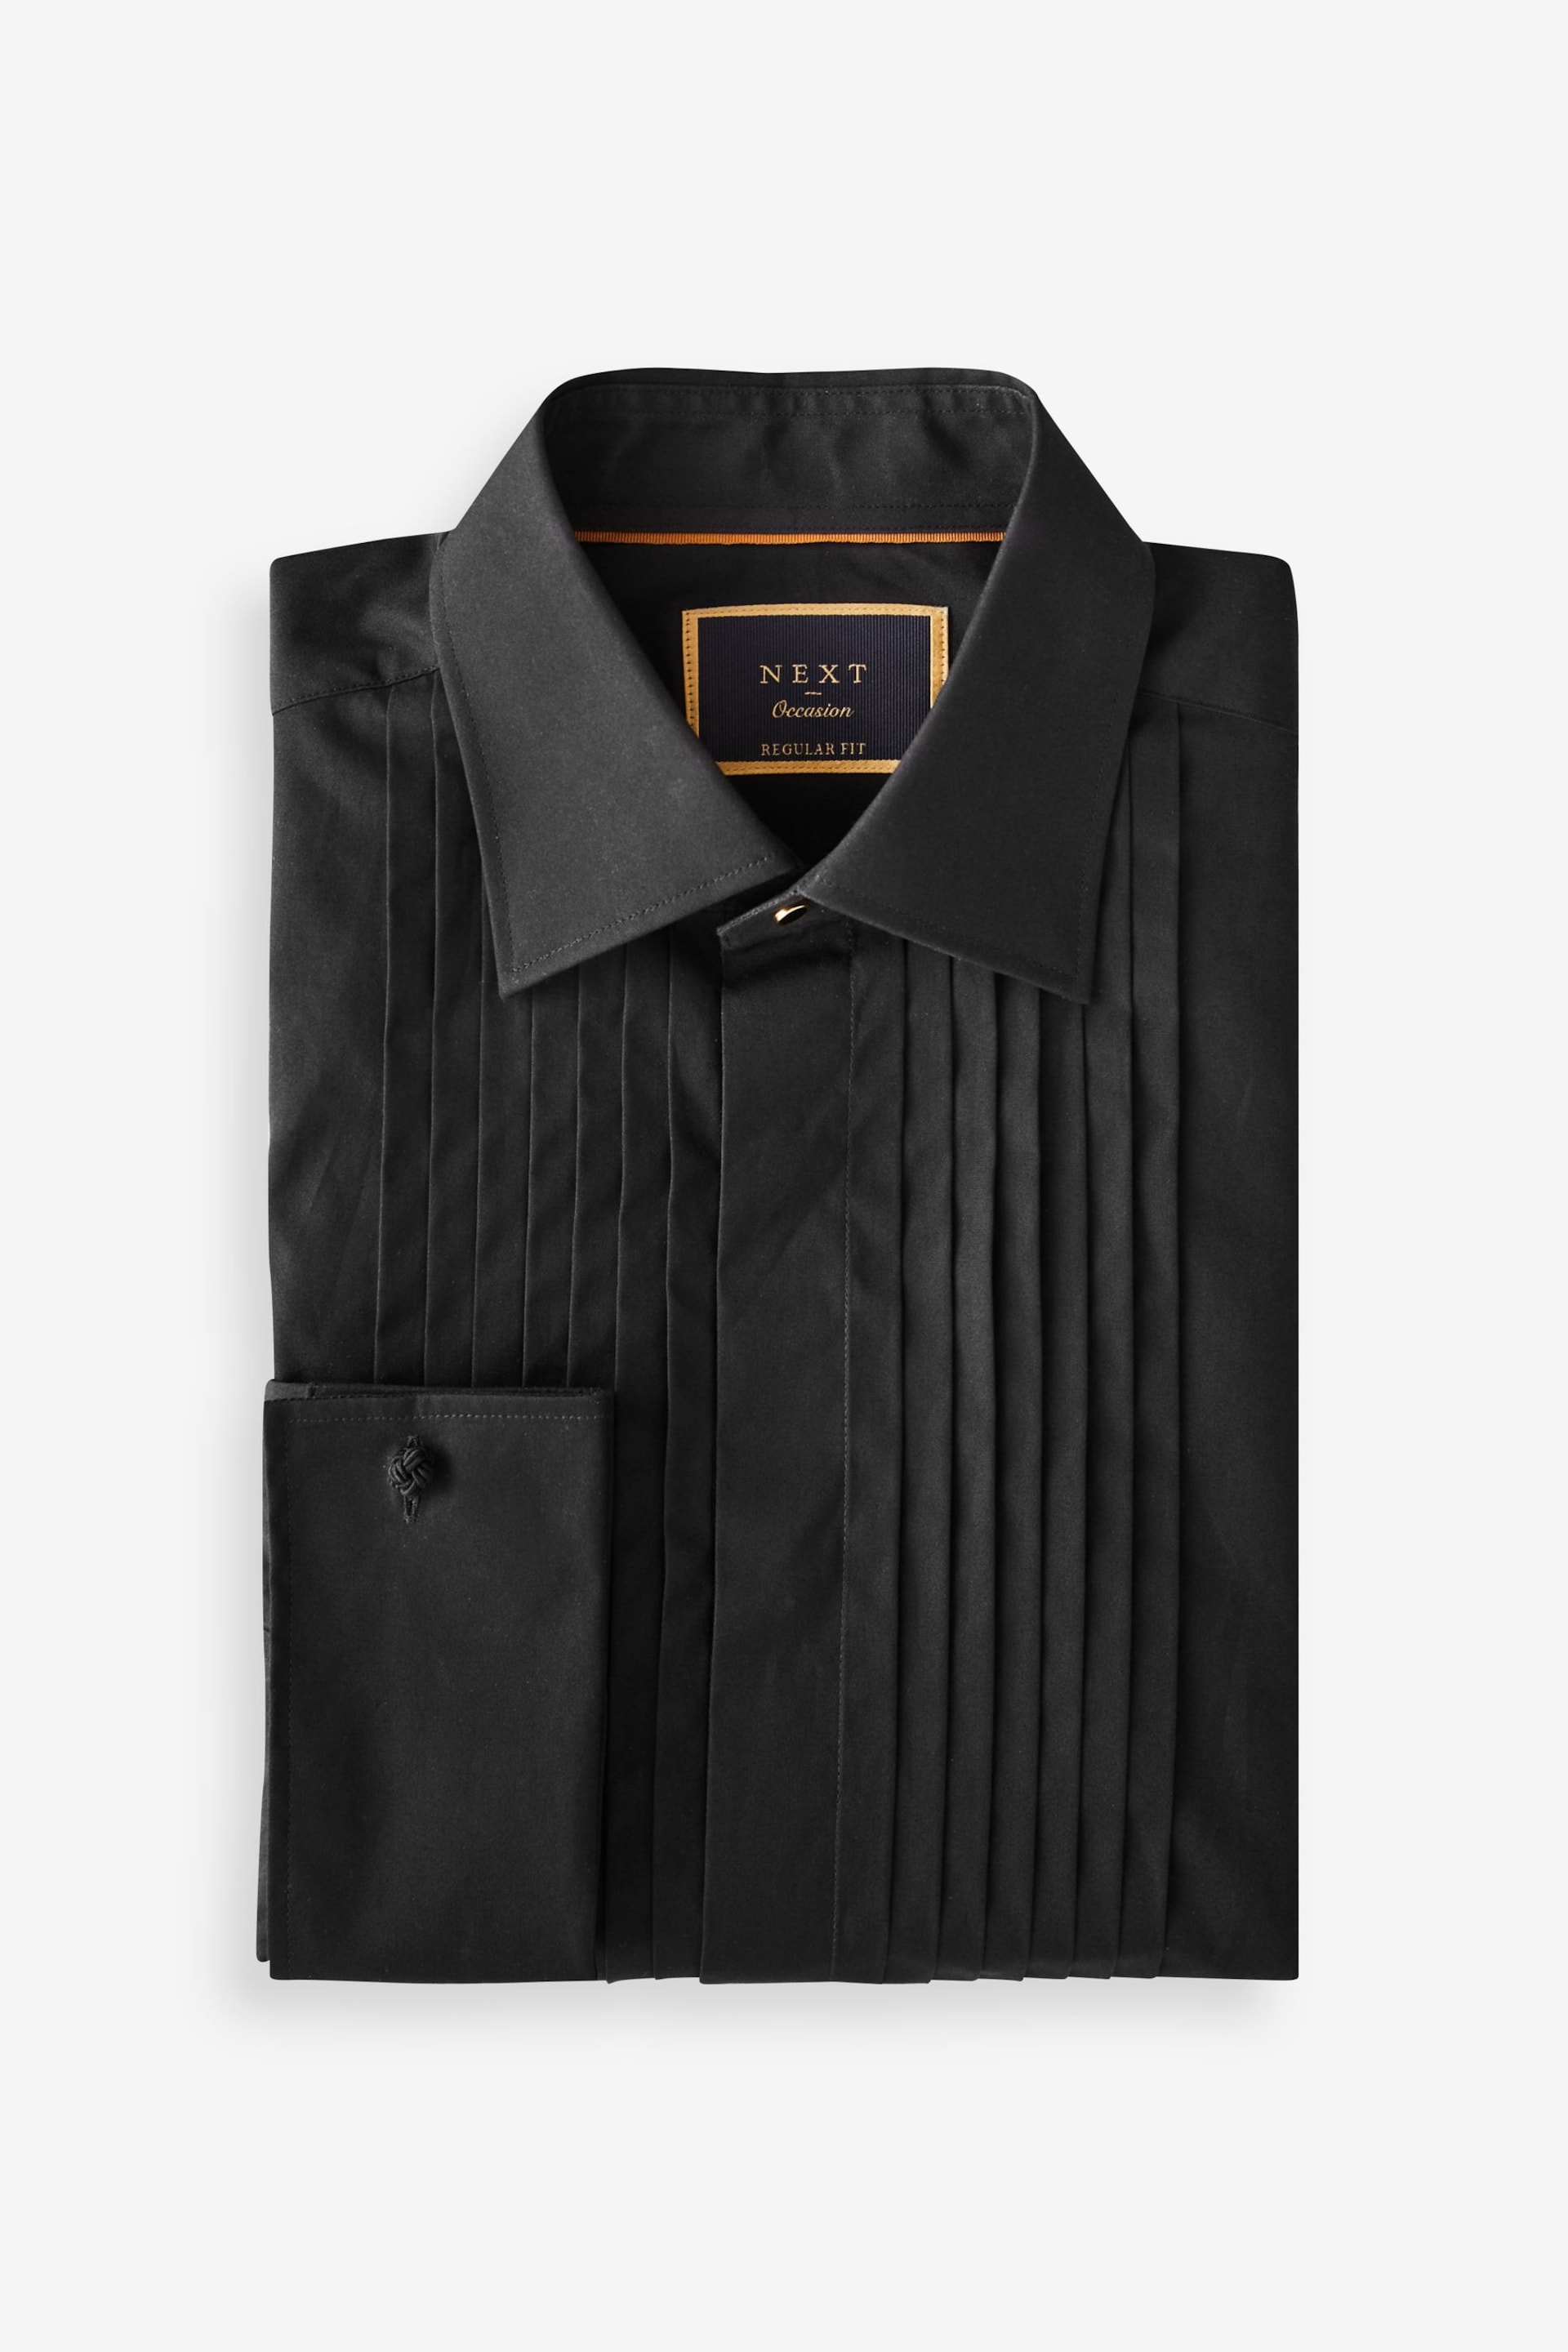 Black Regular Fit Pleated Double Cuff Dress Shirt - Image 5 of 7